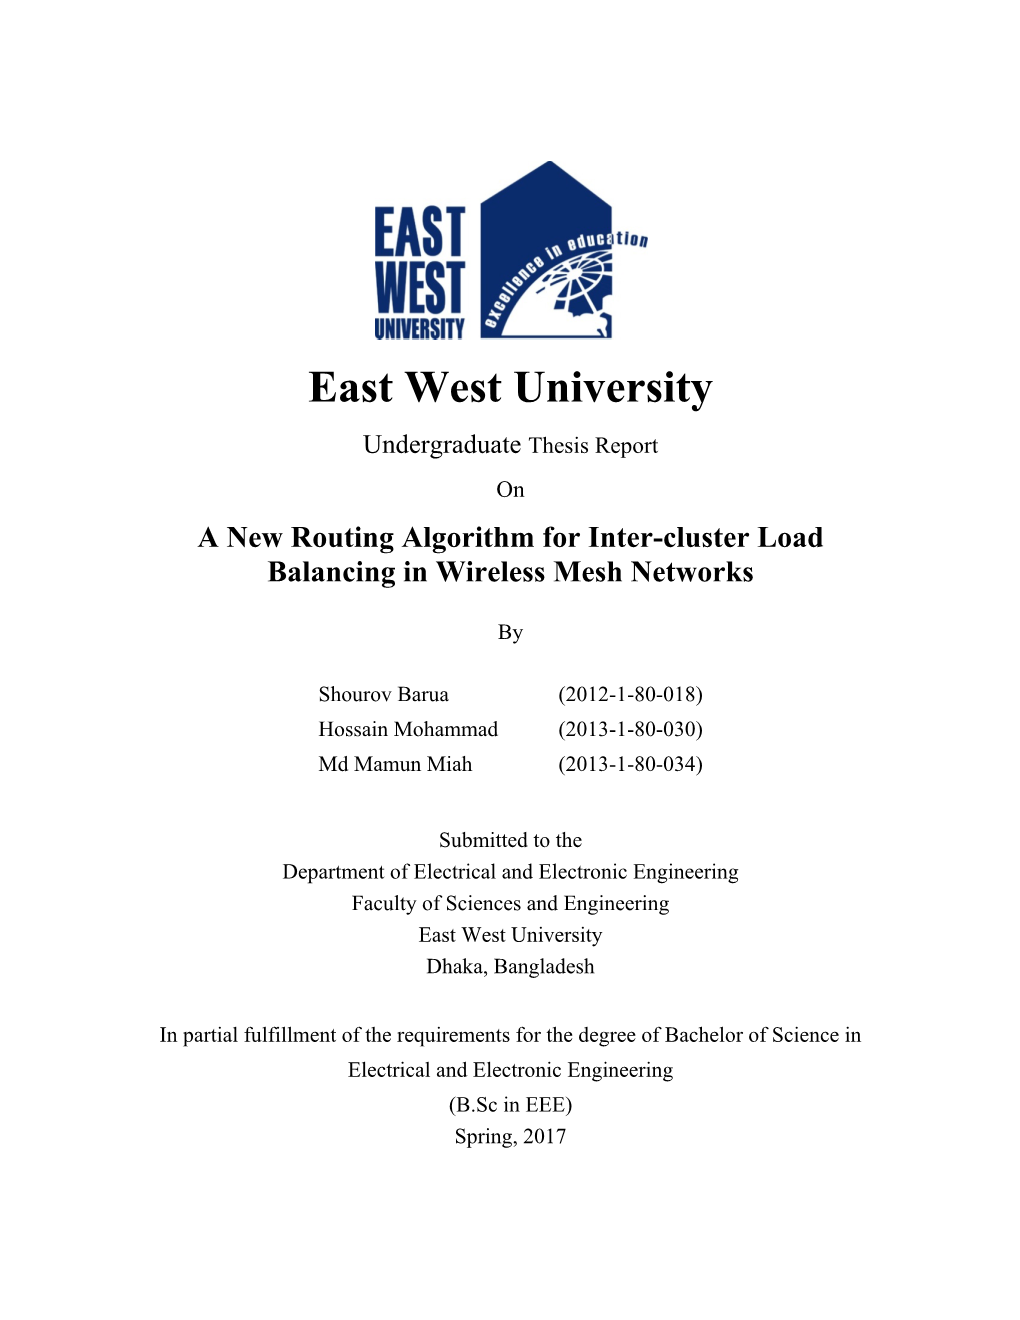 Undergraduate Thesis Report on a New Routing Algorithm for Inter-Cluster Load Balancing in Wireless Mesh Networks